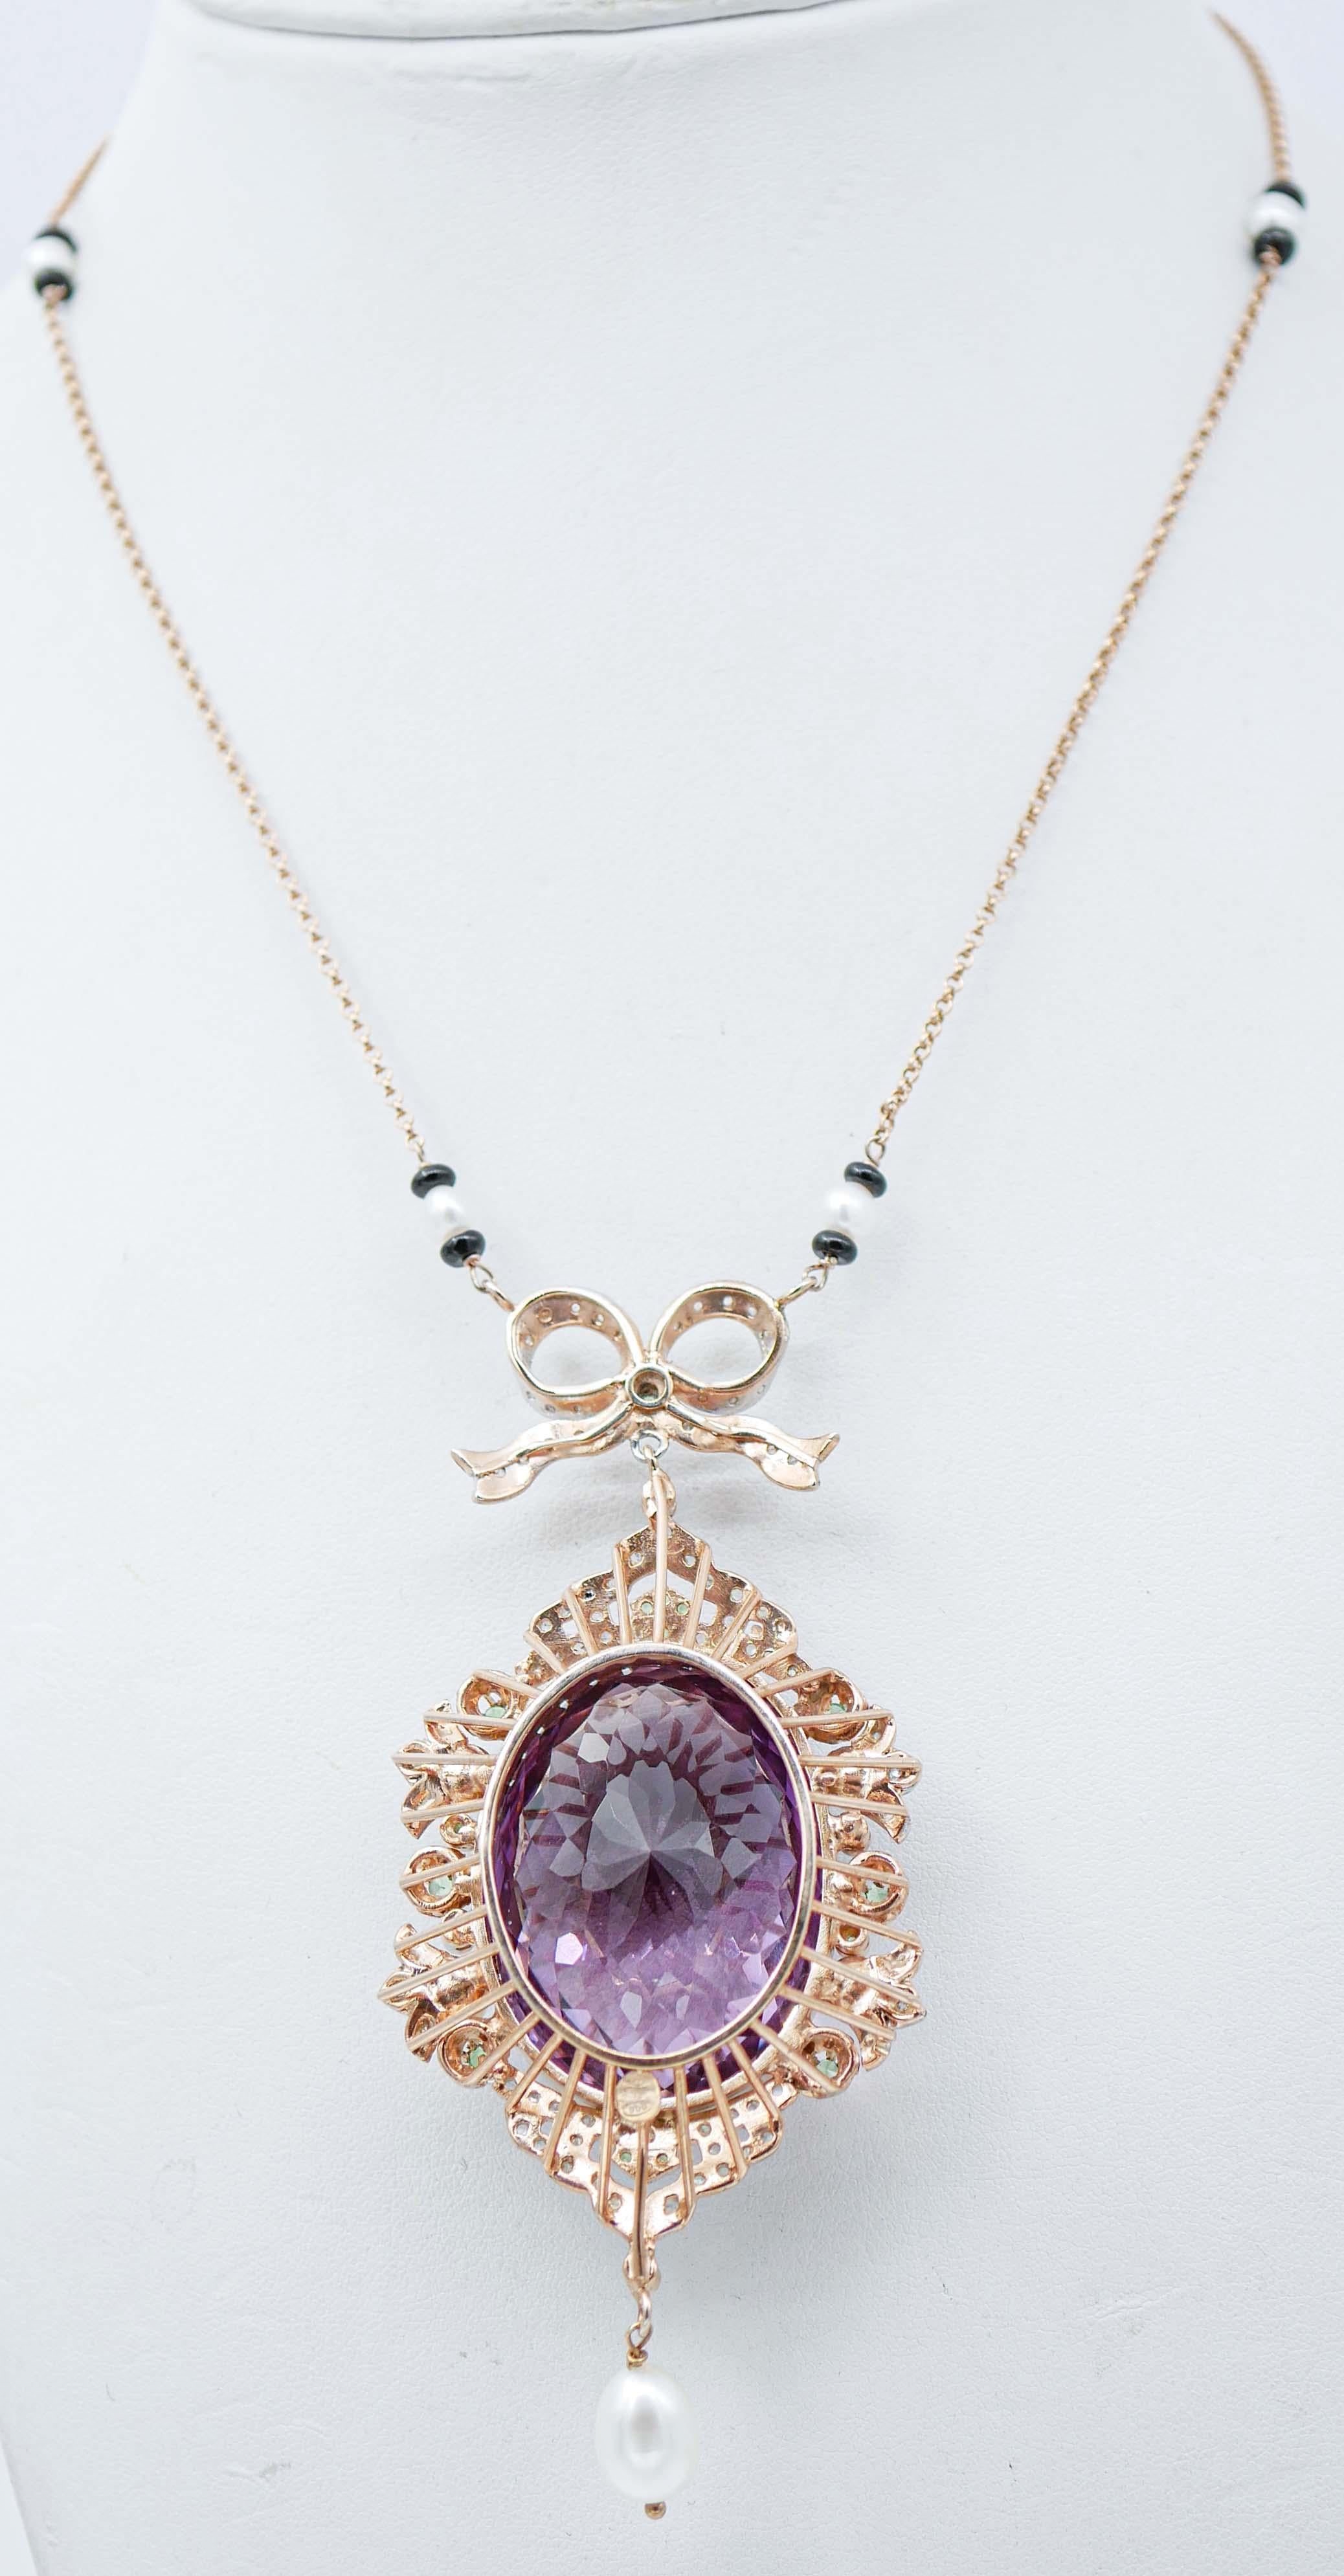 Mixed Cut Amethyst, Tsavorite, Diamonds, Onyx, Pearls,  Gold and Silver Pendant Necklace For Sale